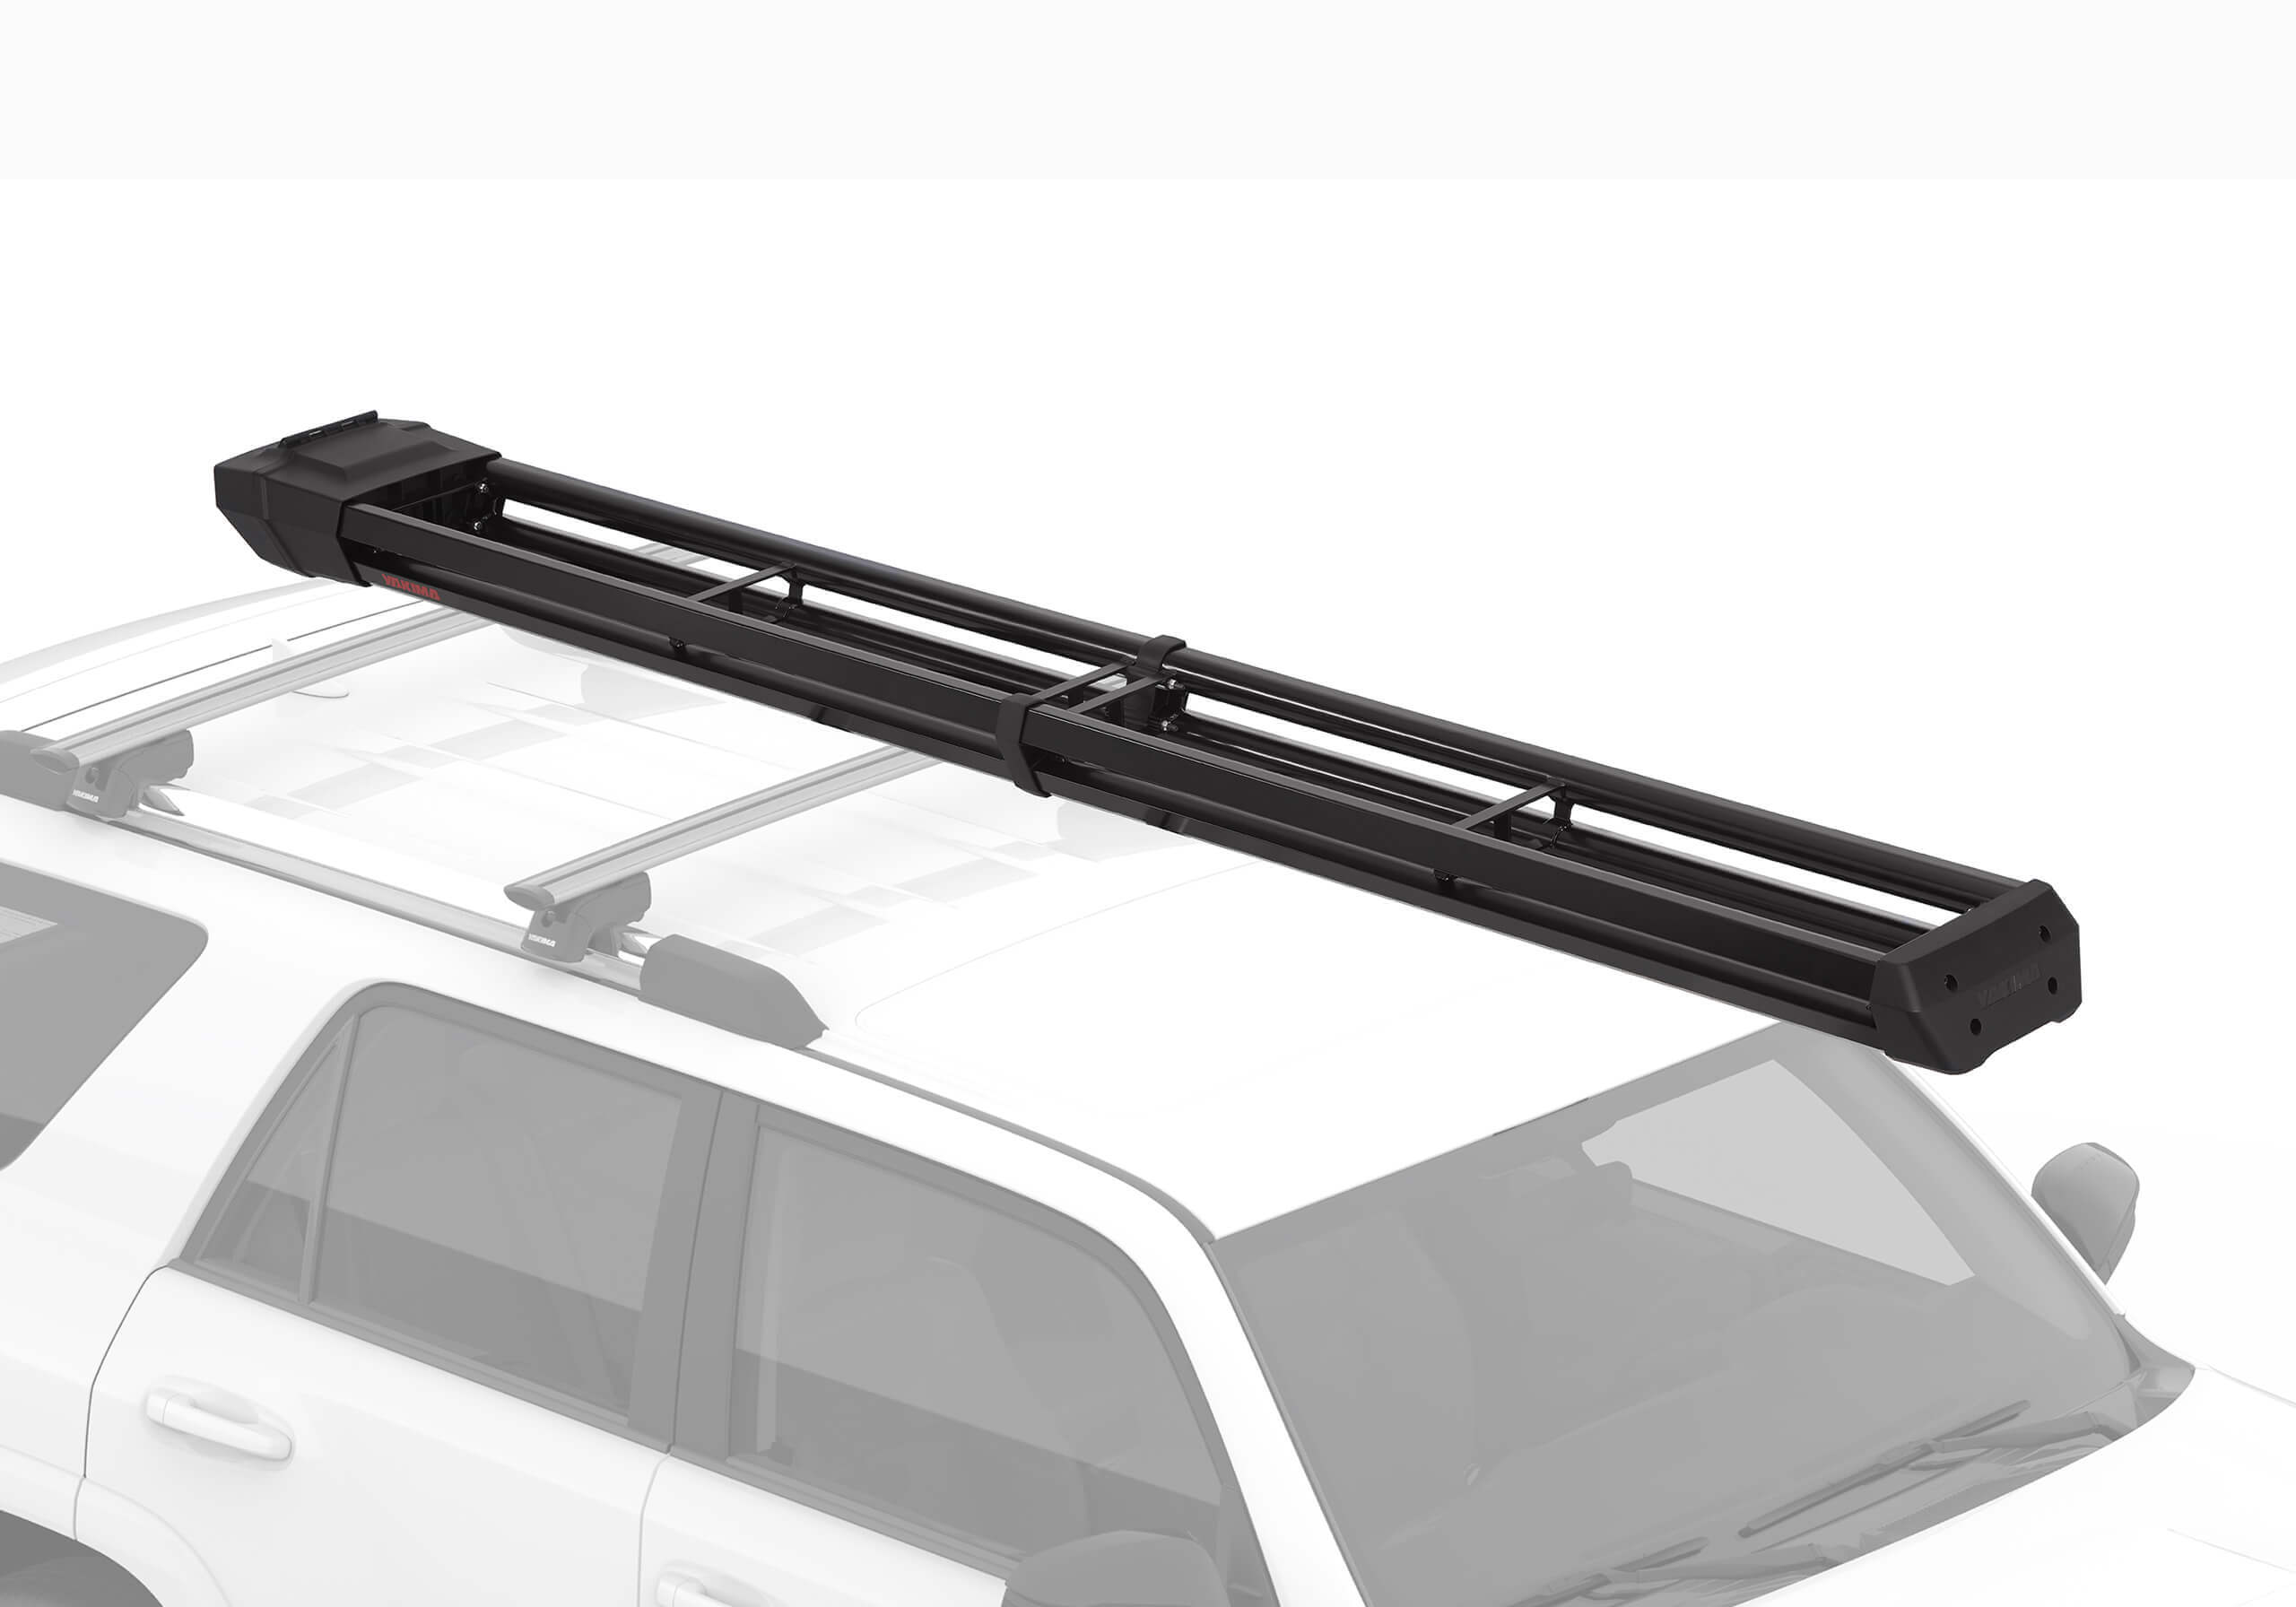 Yakima DoubleHaul fly rod carrier (up to 4 rods) no. 8004087